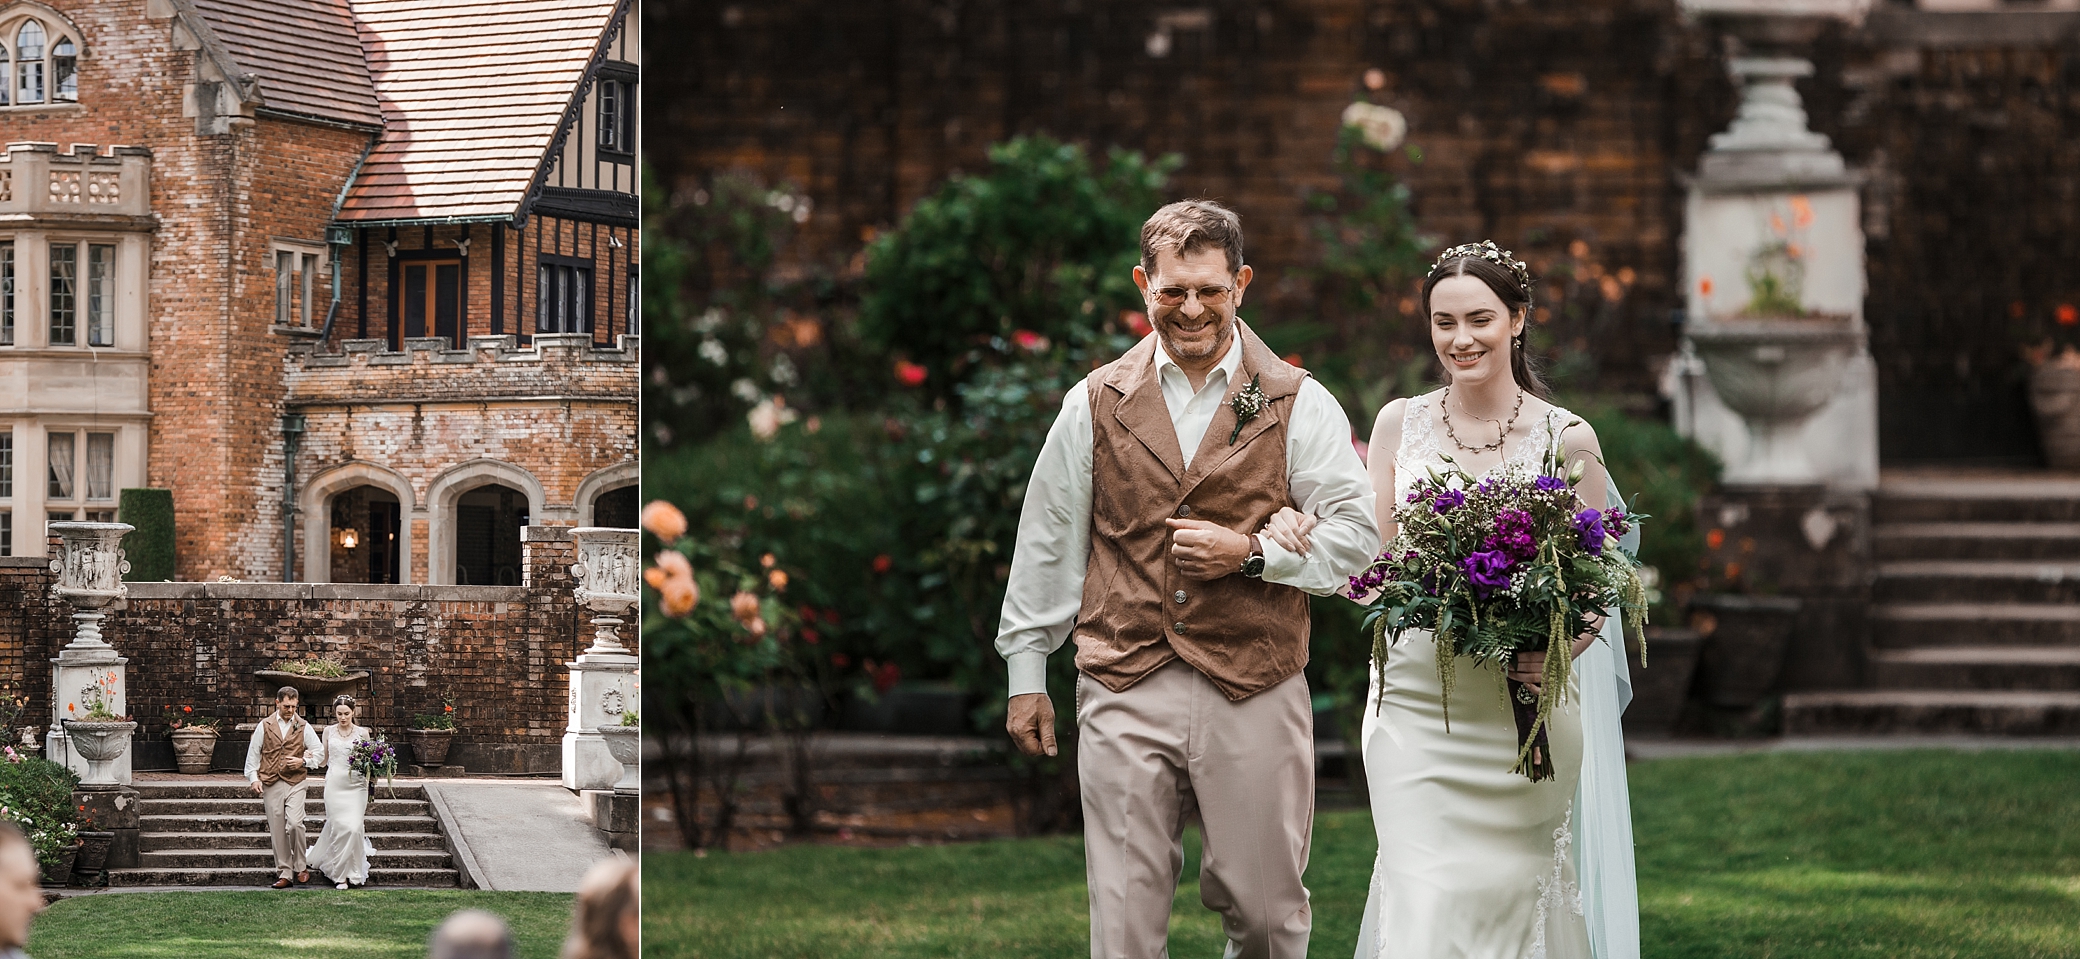 Bride and father walking down the aisle at Thornewood Castle Wedding | Megan Montalvo Photography